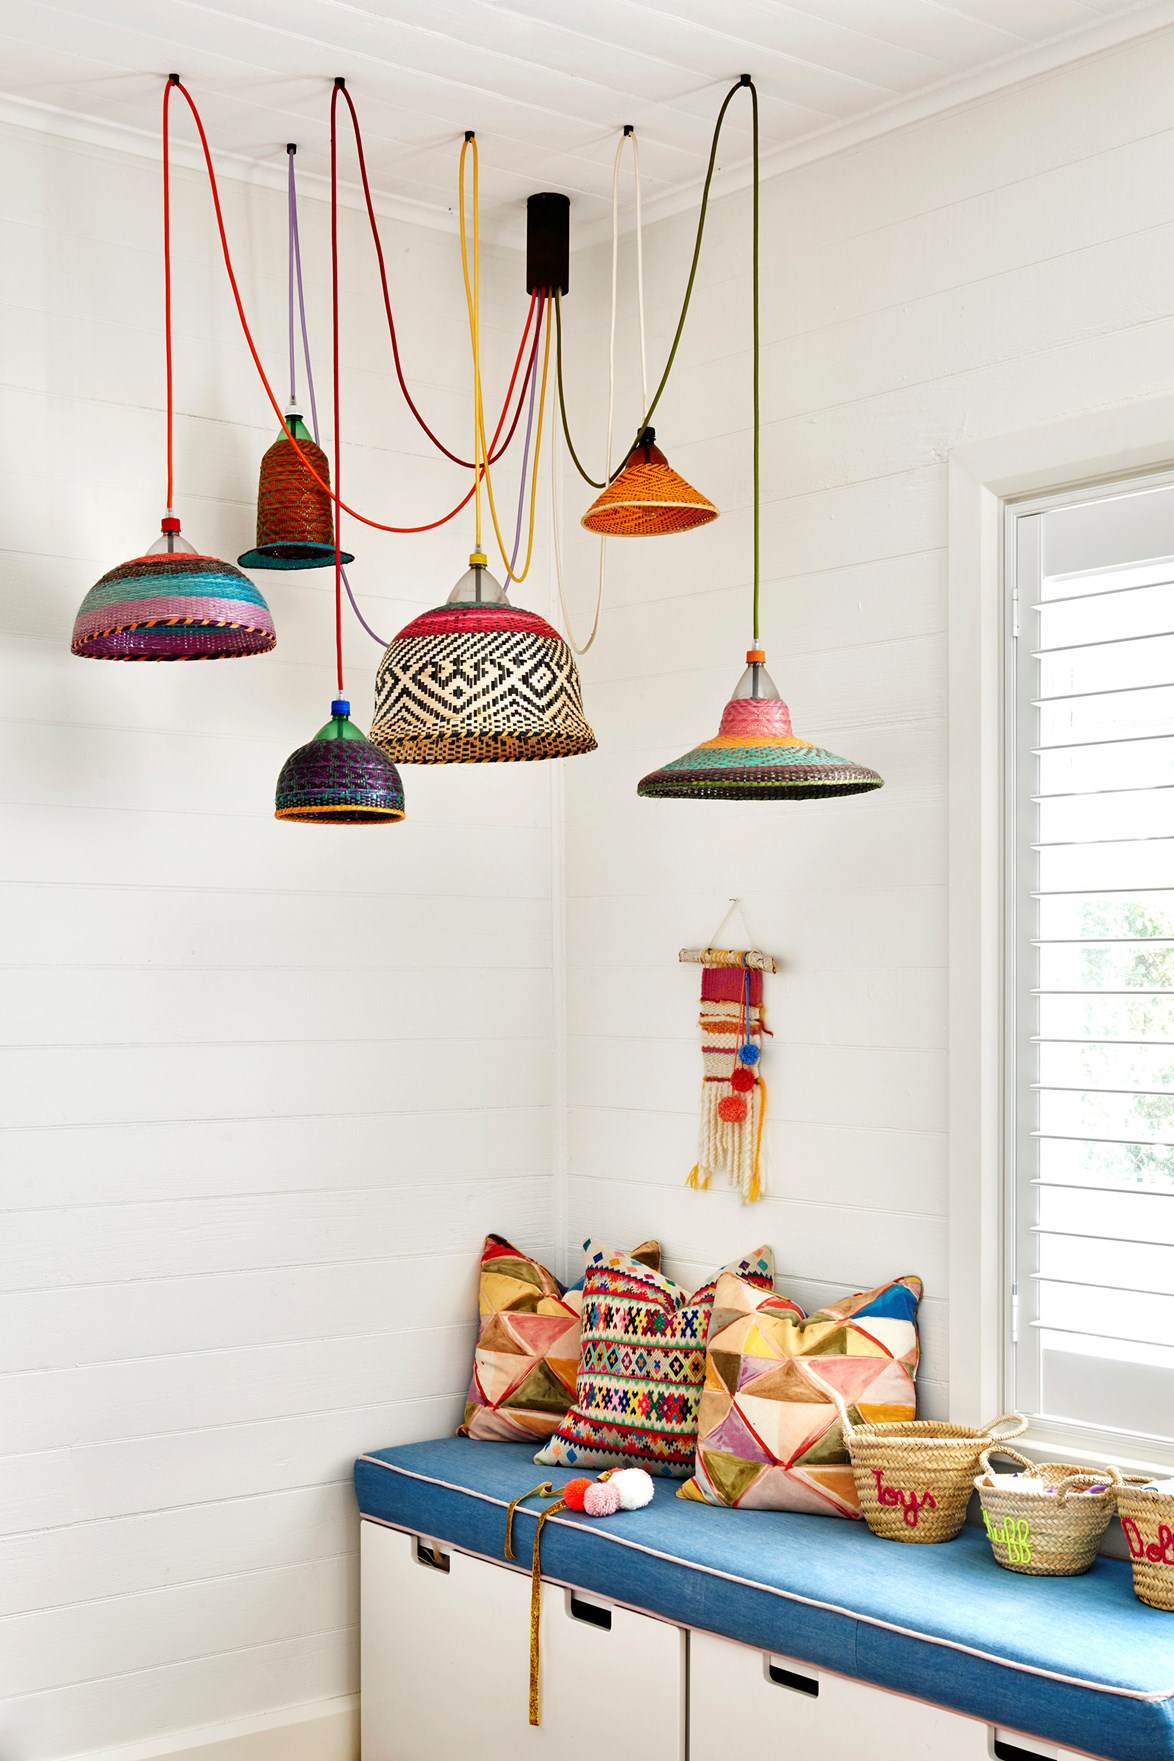 A window seat needn't be built-in cabinetry. This Ikea storage unit has been topped with a brightly-coloured upholstered cushion made to fit beneath the window of [this colourful Byron Bay cottage](https://www.homestolove.com.au/coastal-cottage-byron-bay-20442|target="_blank"), giving the flexibility to change up this spot as the needs change for the children who live here.